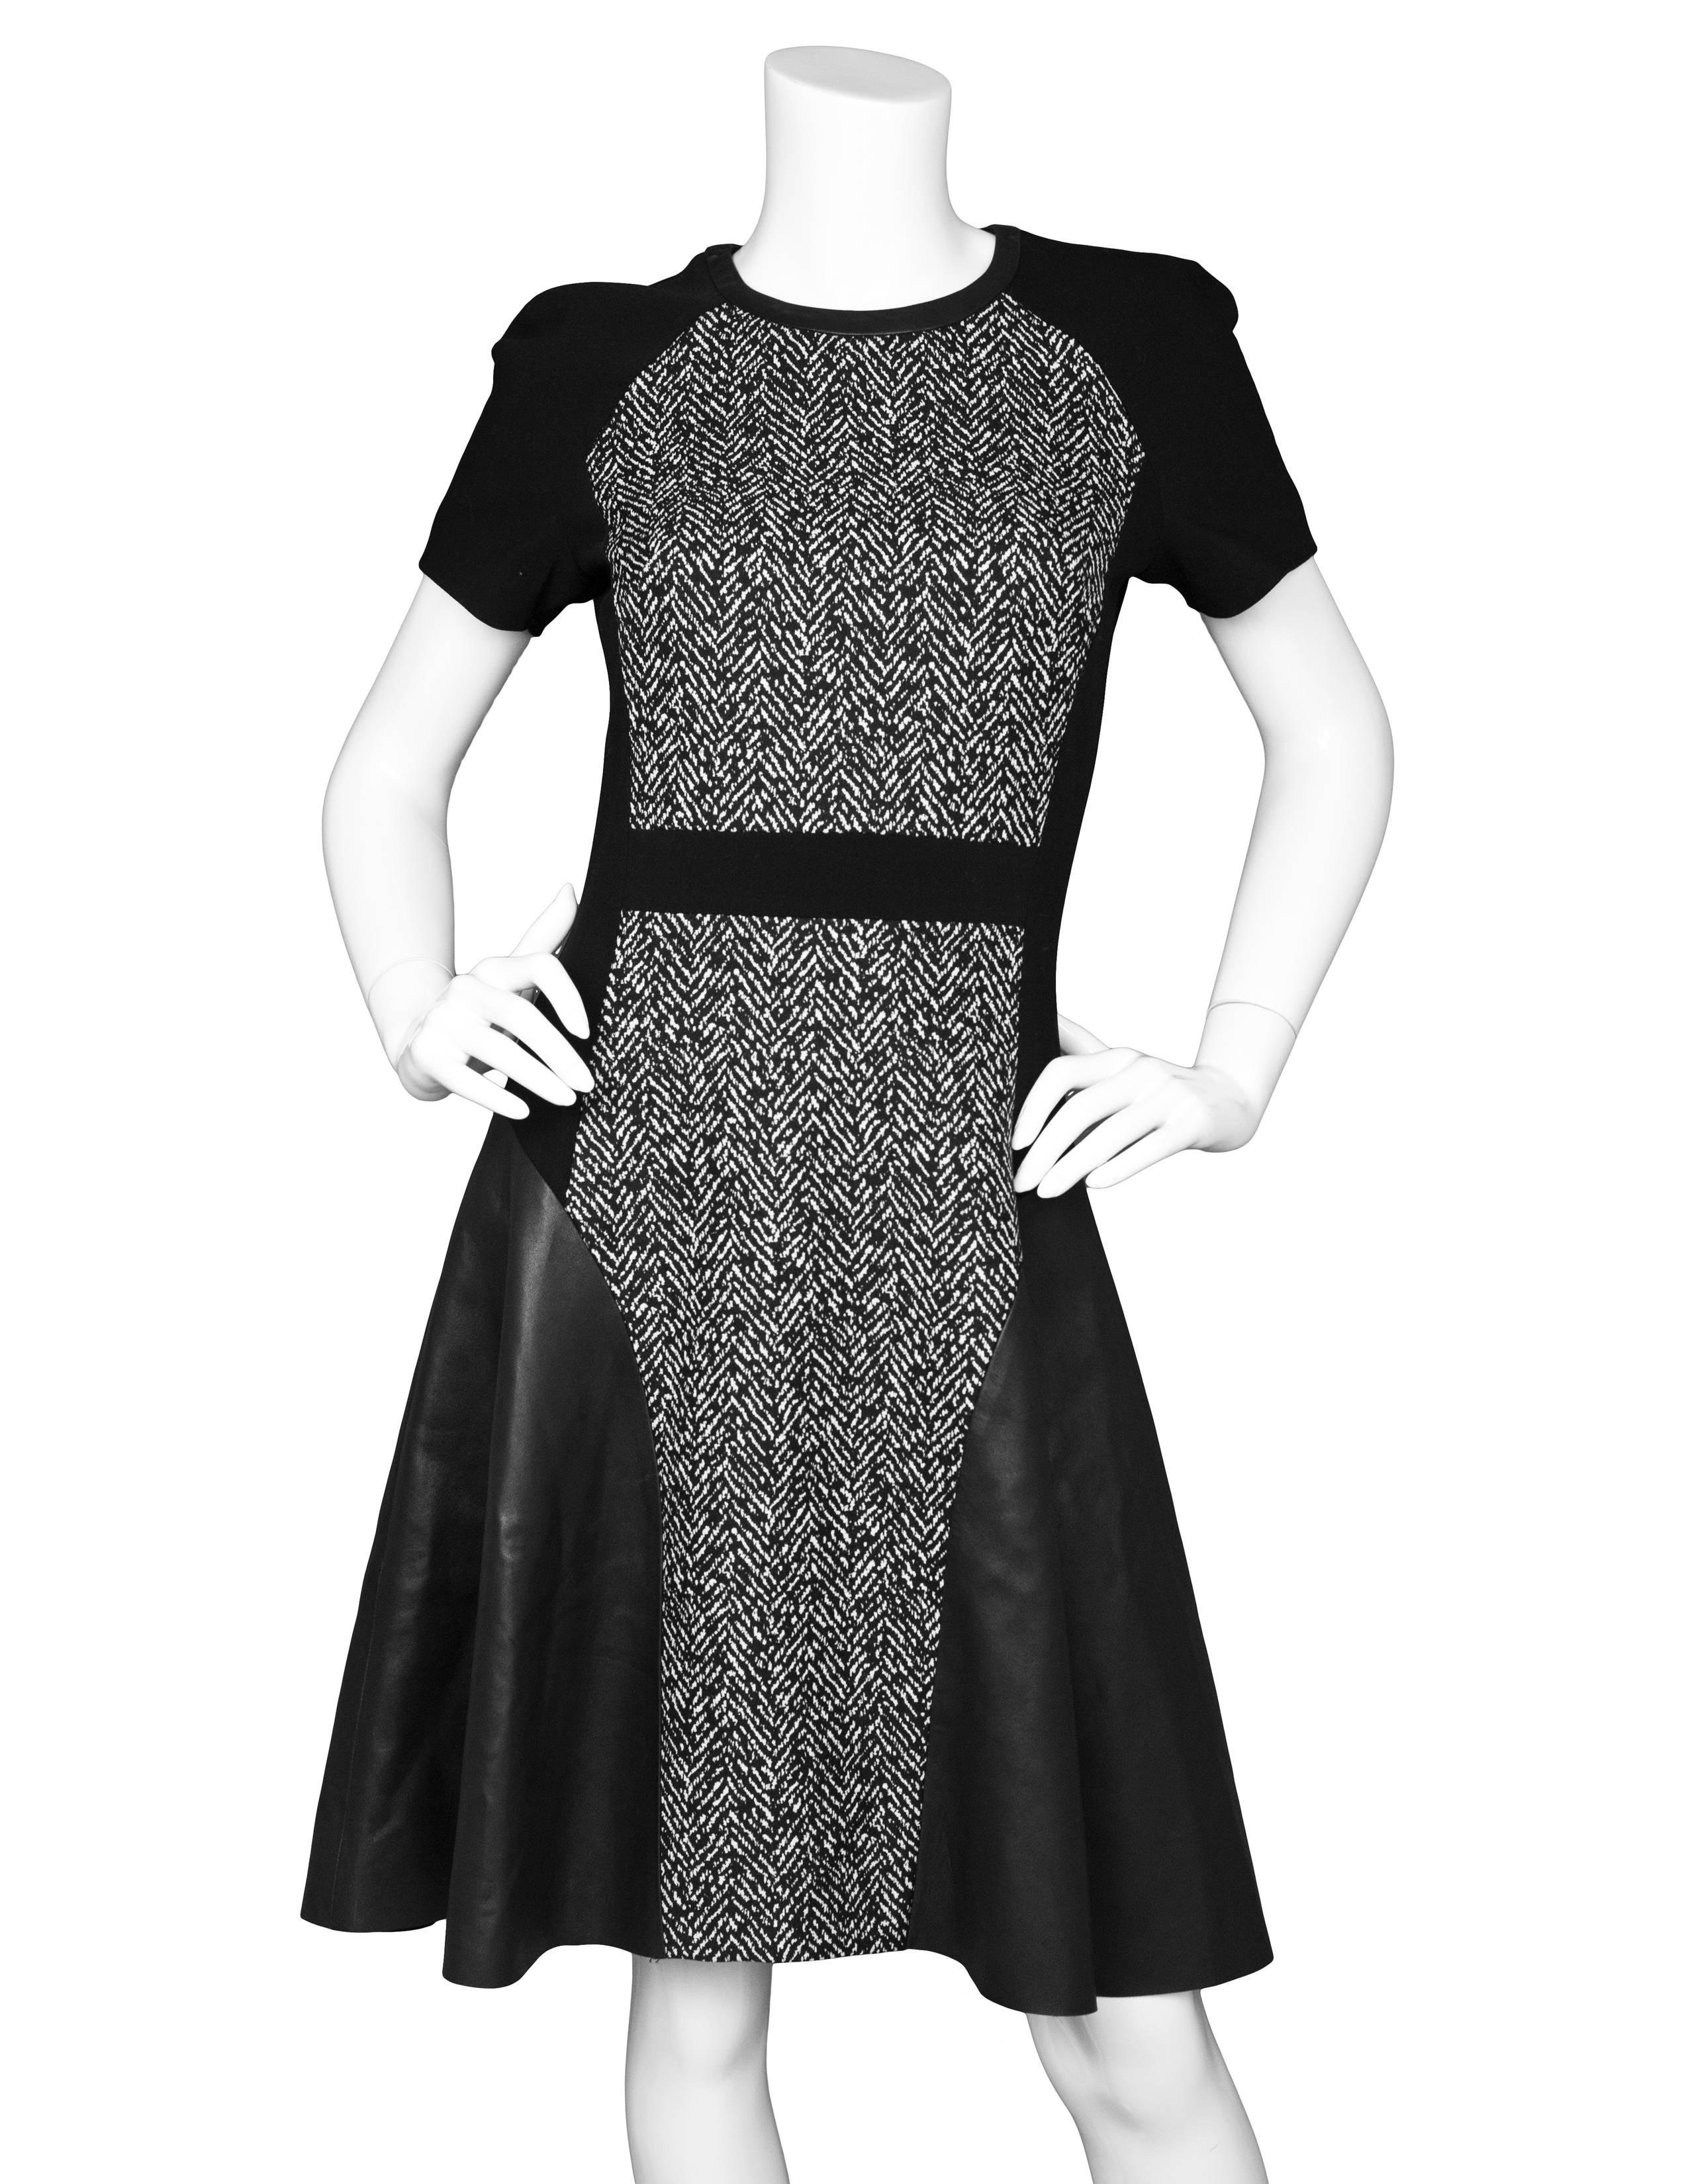 Michael Kors Black & White Wool Herringbone Print & Leather Dress Sz 4

Made In: Italy
Color: Black, white
Composition: 100% Wool
Lining: Black, nylon-blend
Closure/Opening: Back center zip up
Exterior Pockets: None
Interior Pockets: None
Overall